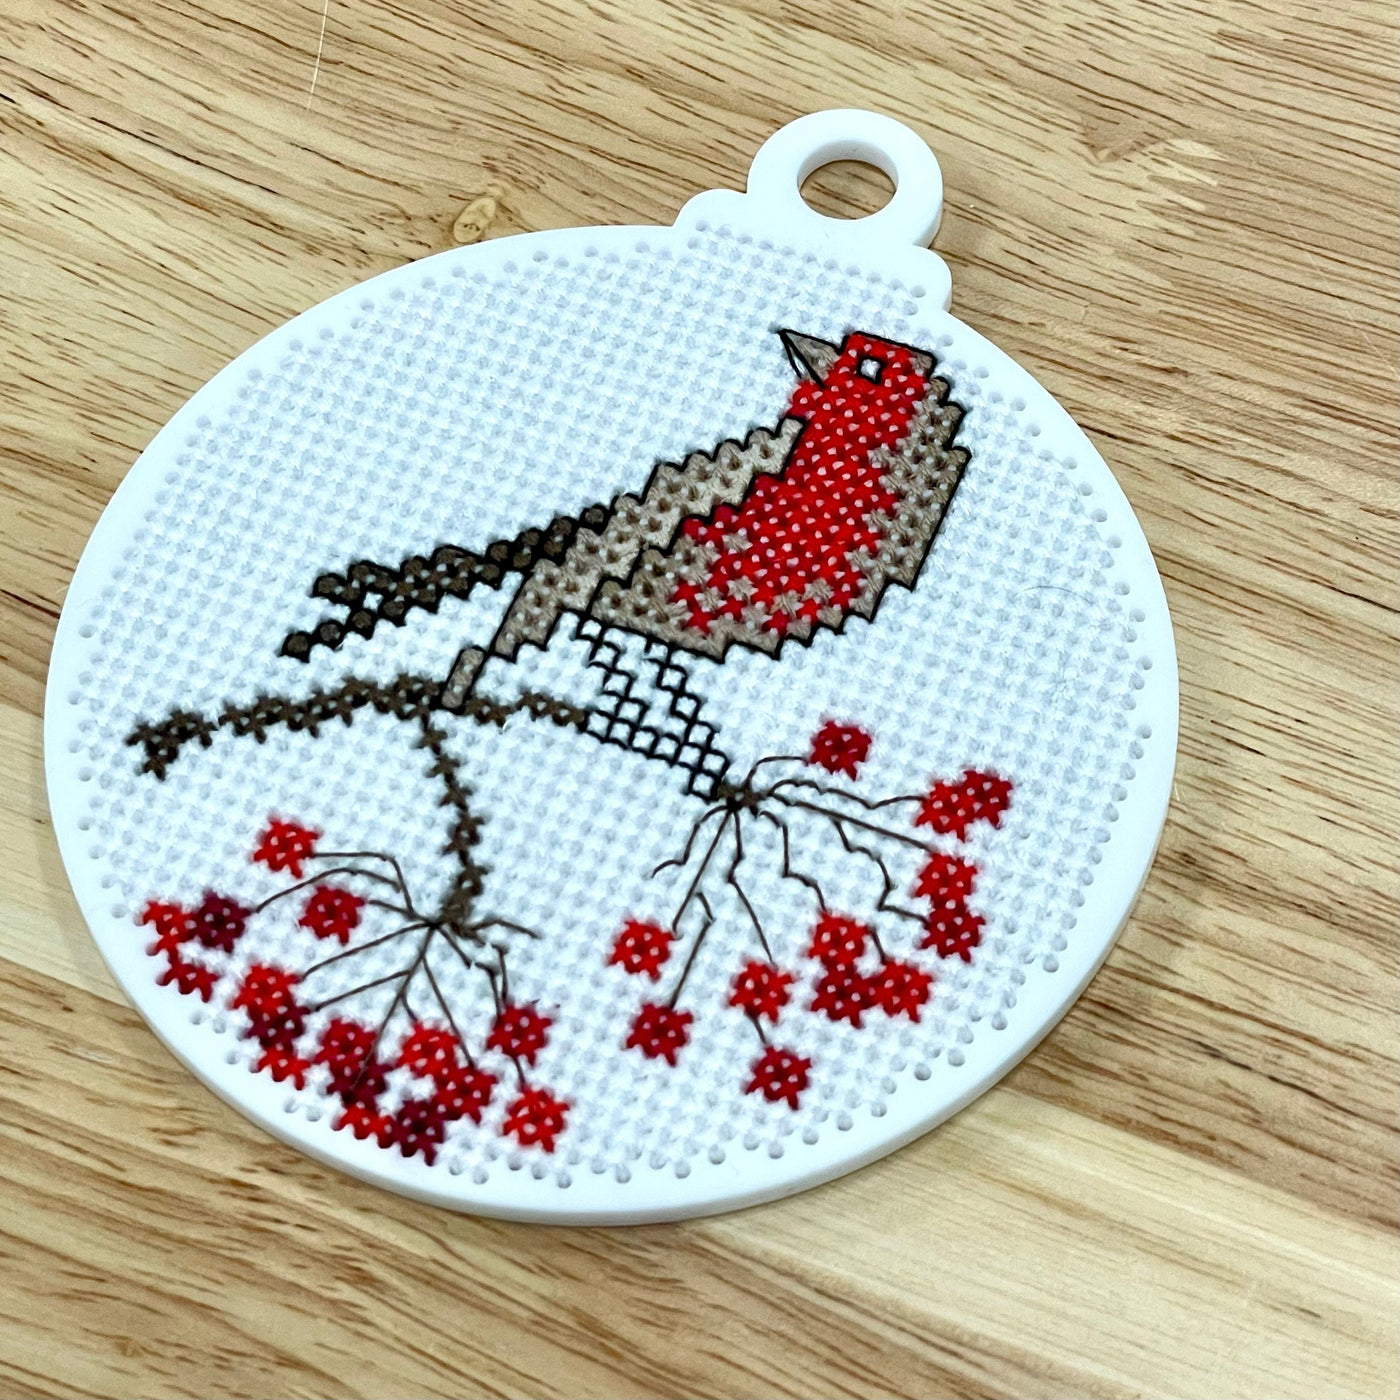 Stitch your own bauble - 3mm acrylic cross stitch blank (3" or 4")